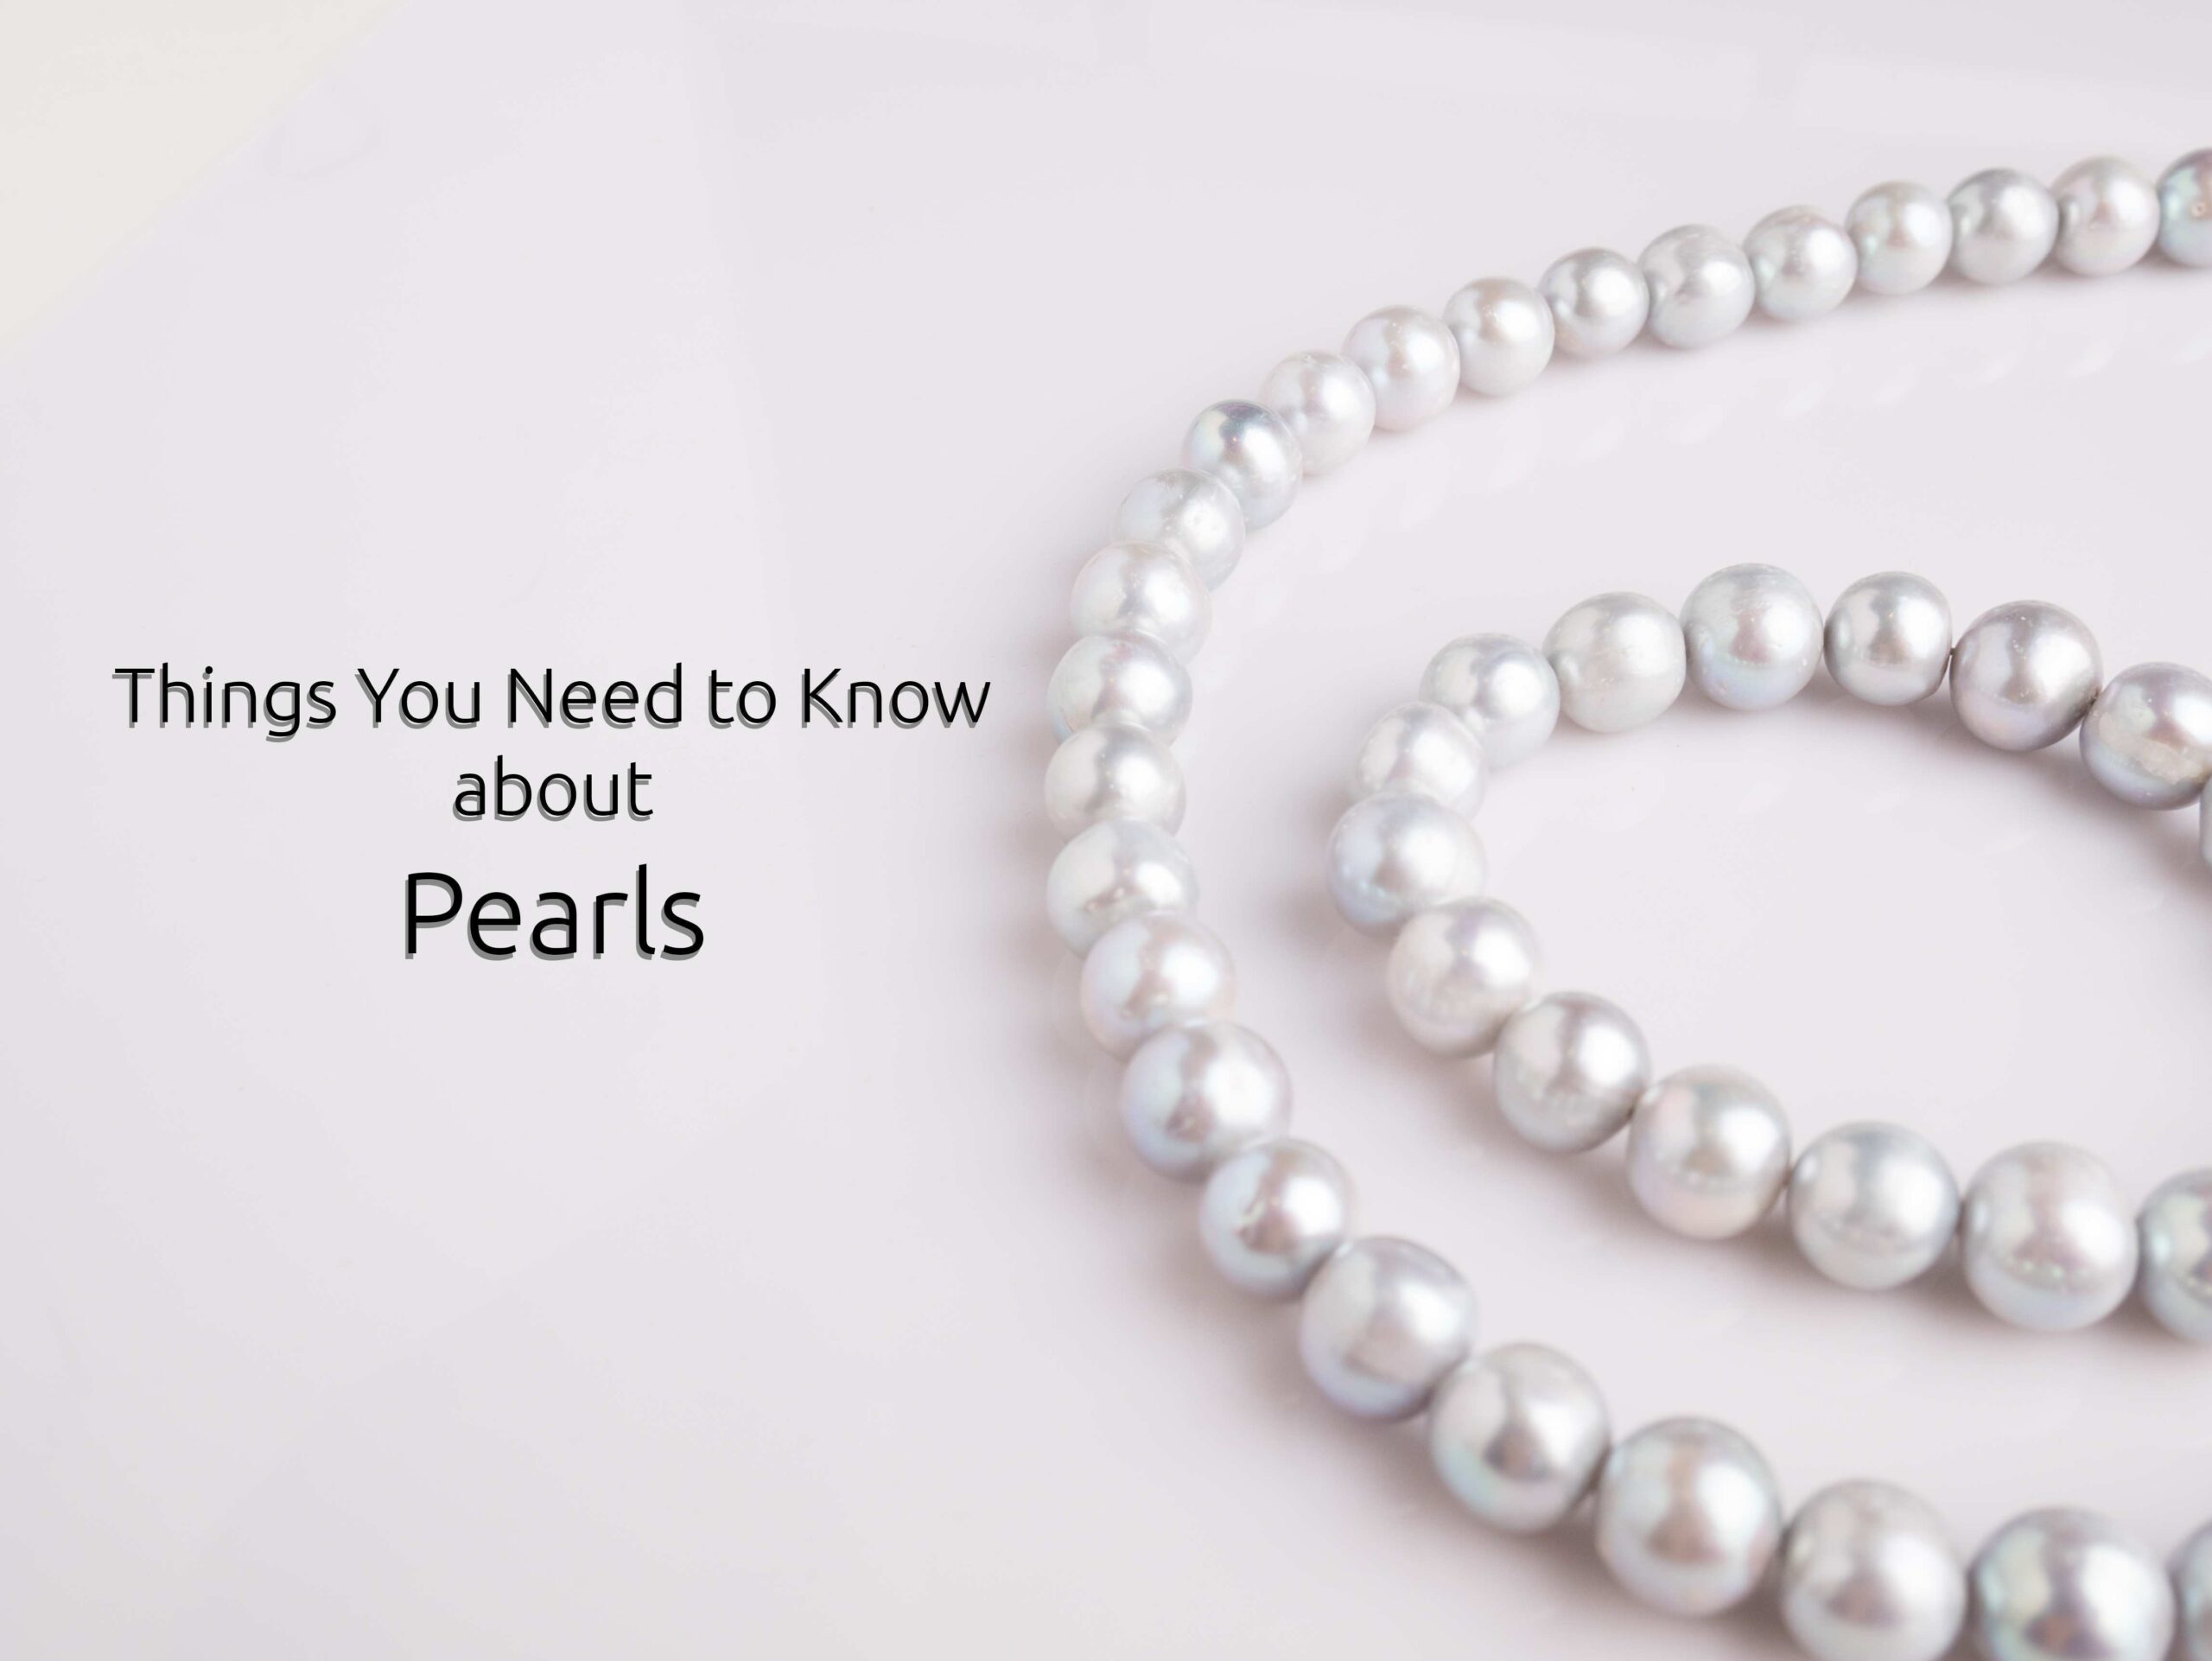 Things You Need to Know about Pearls